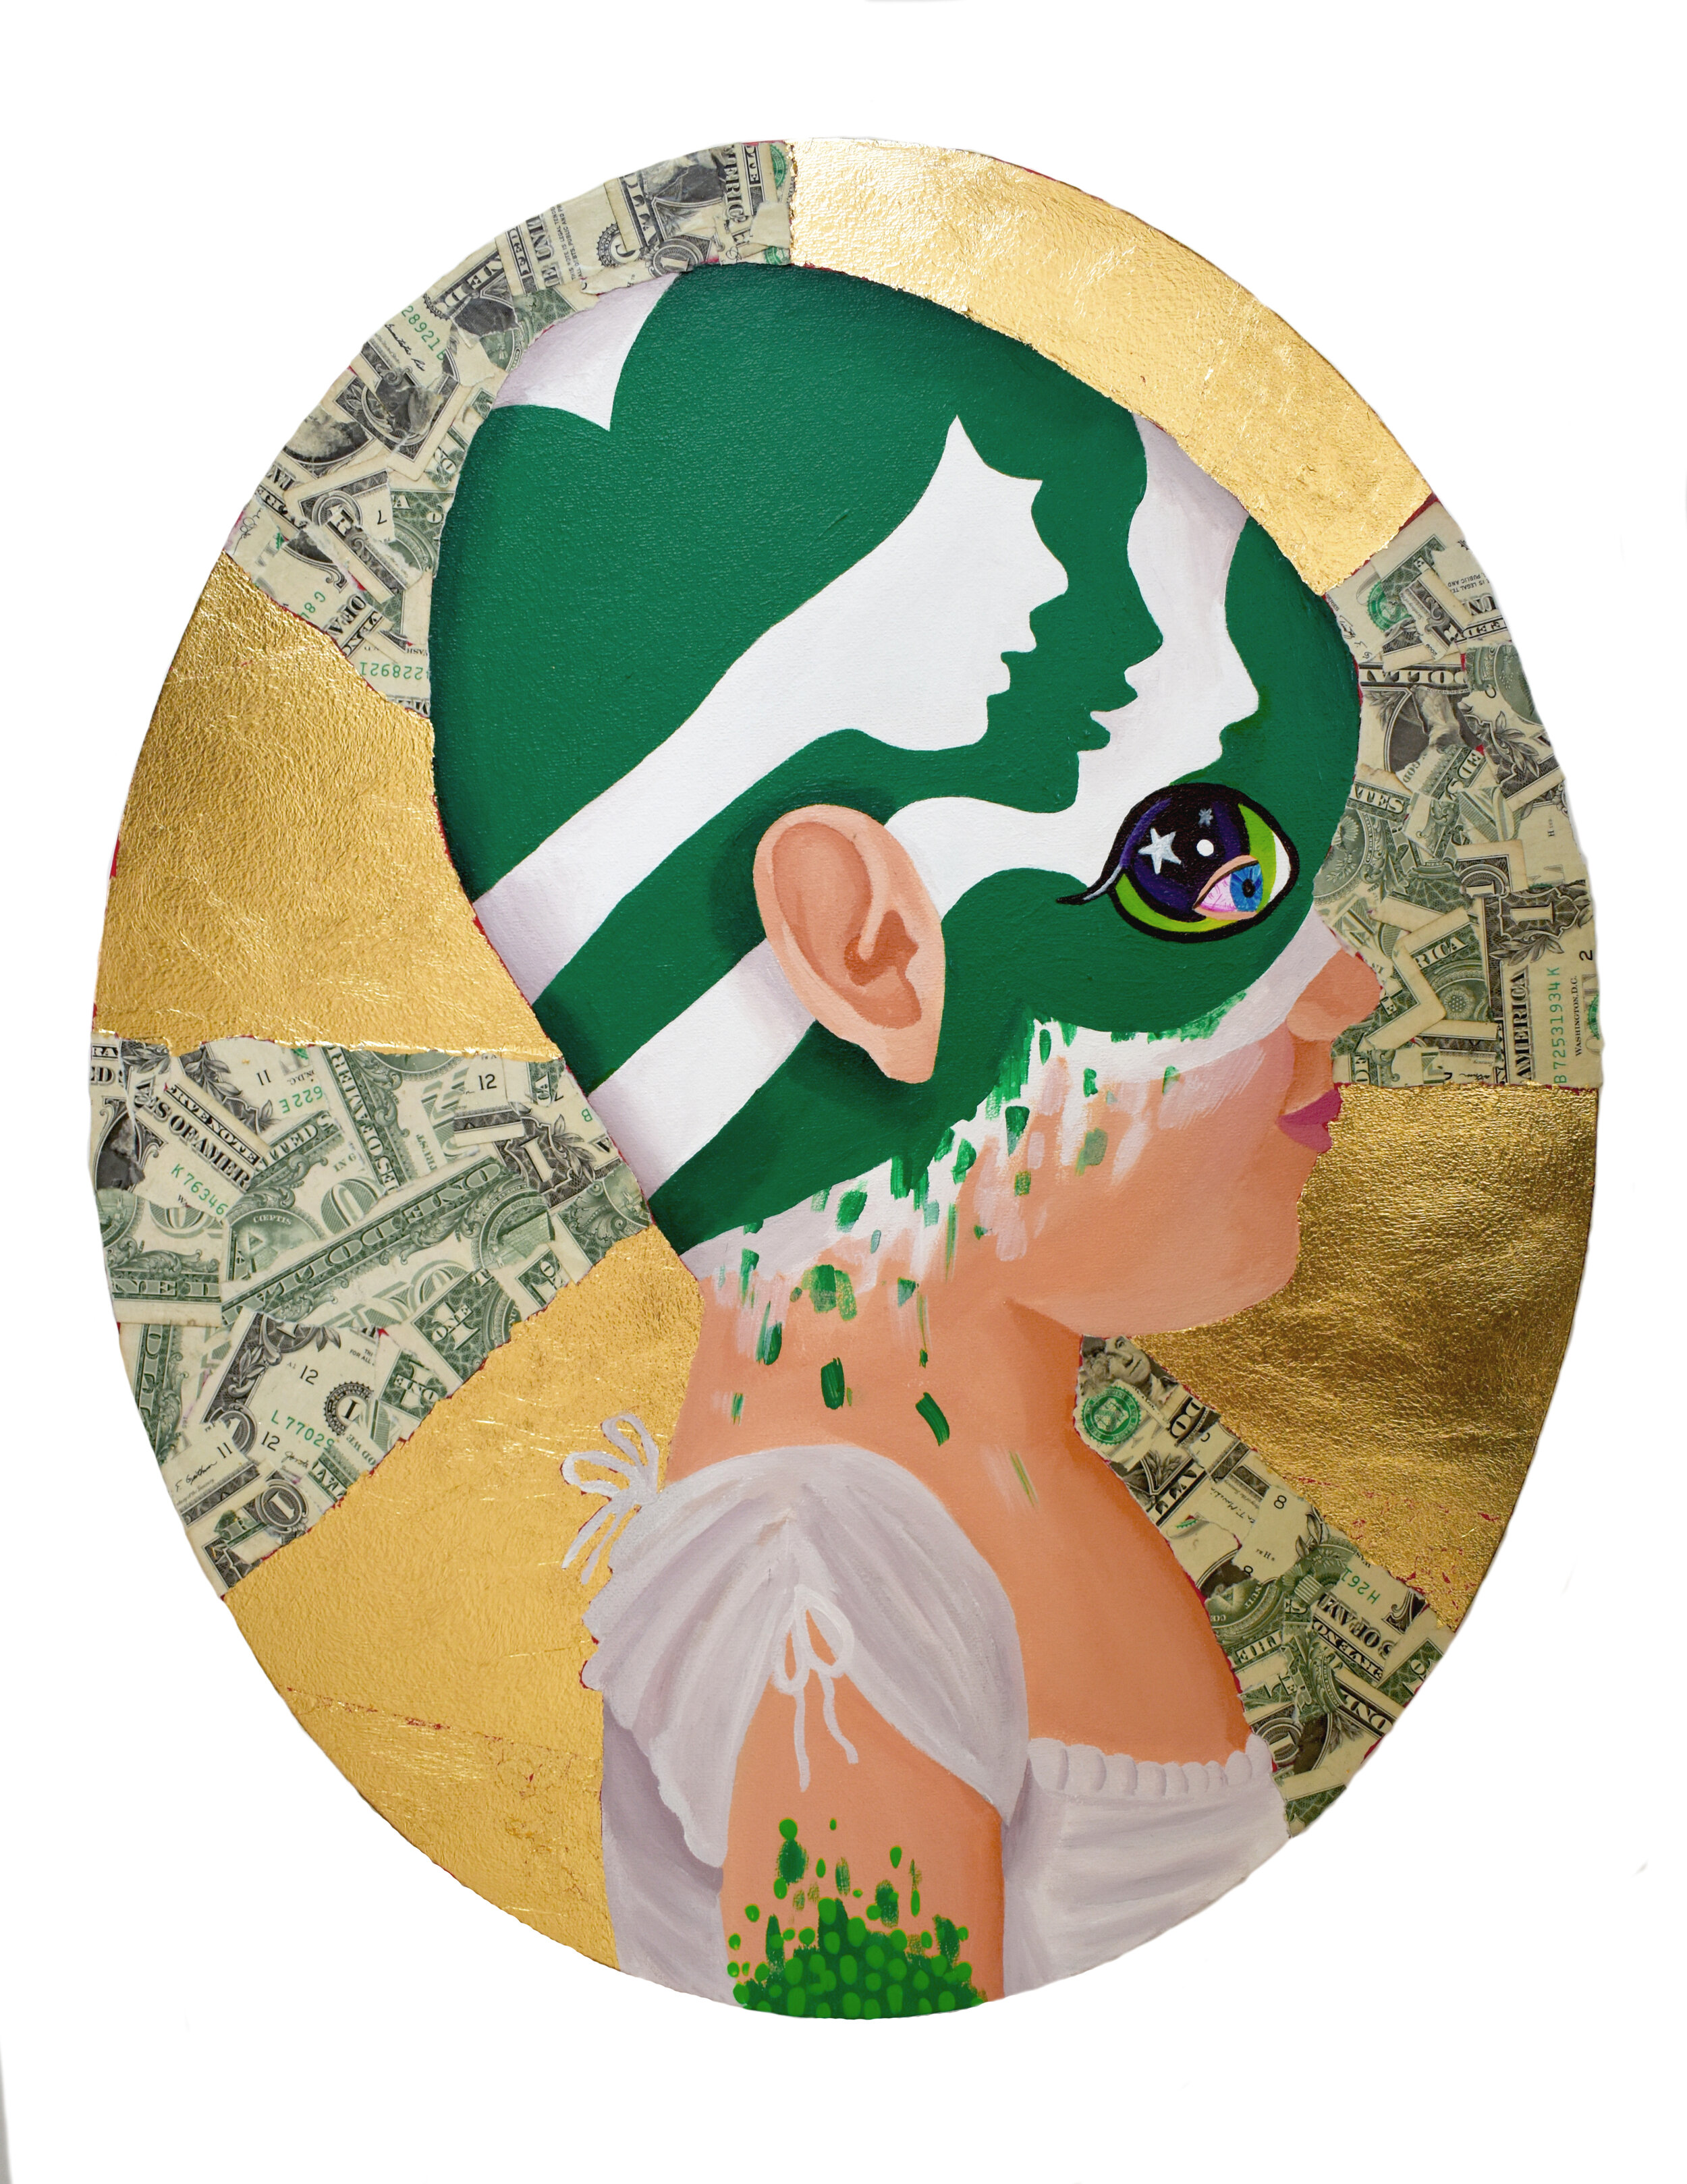   Painted Girl Scout Youth , 2019  16 x 20 inches (oval) (40.64 x 50.8 cm.)  Acrylic, gold leaf, and American dollar bills on canvas  Private collection, Zürich 